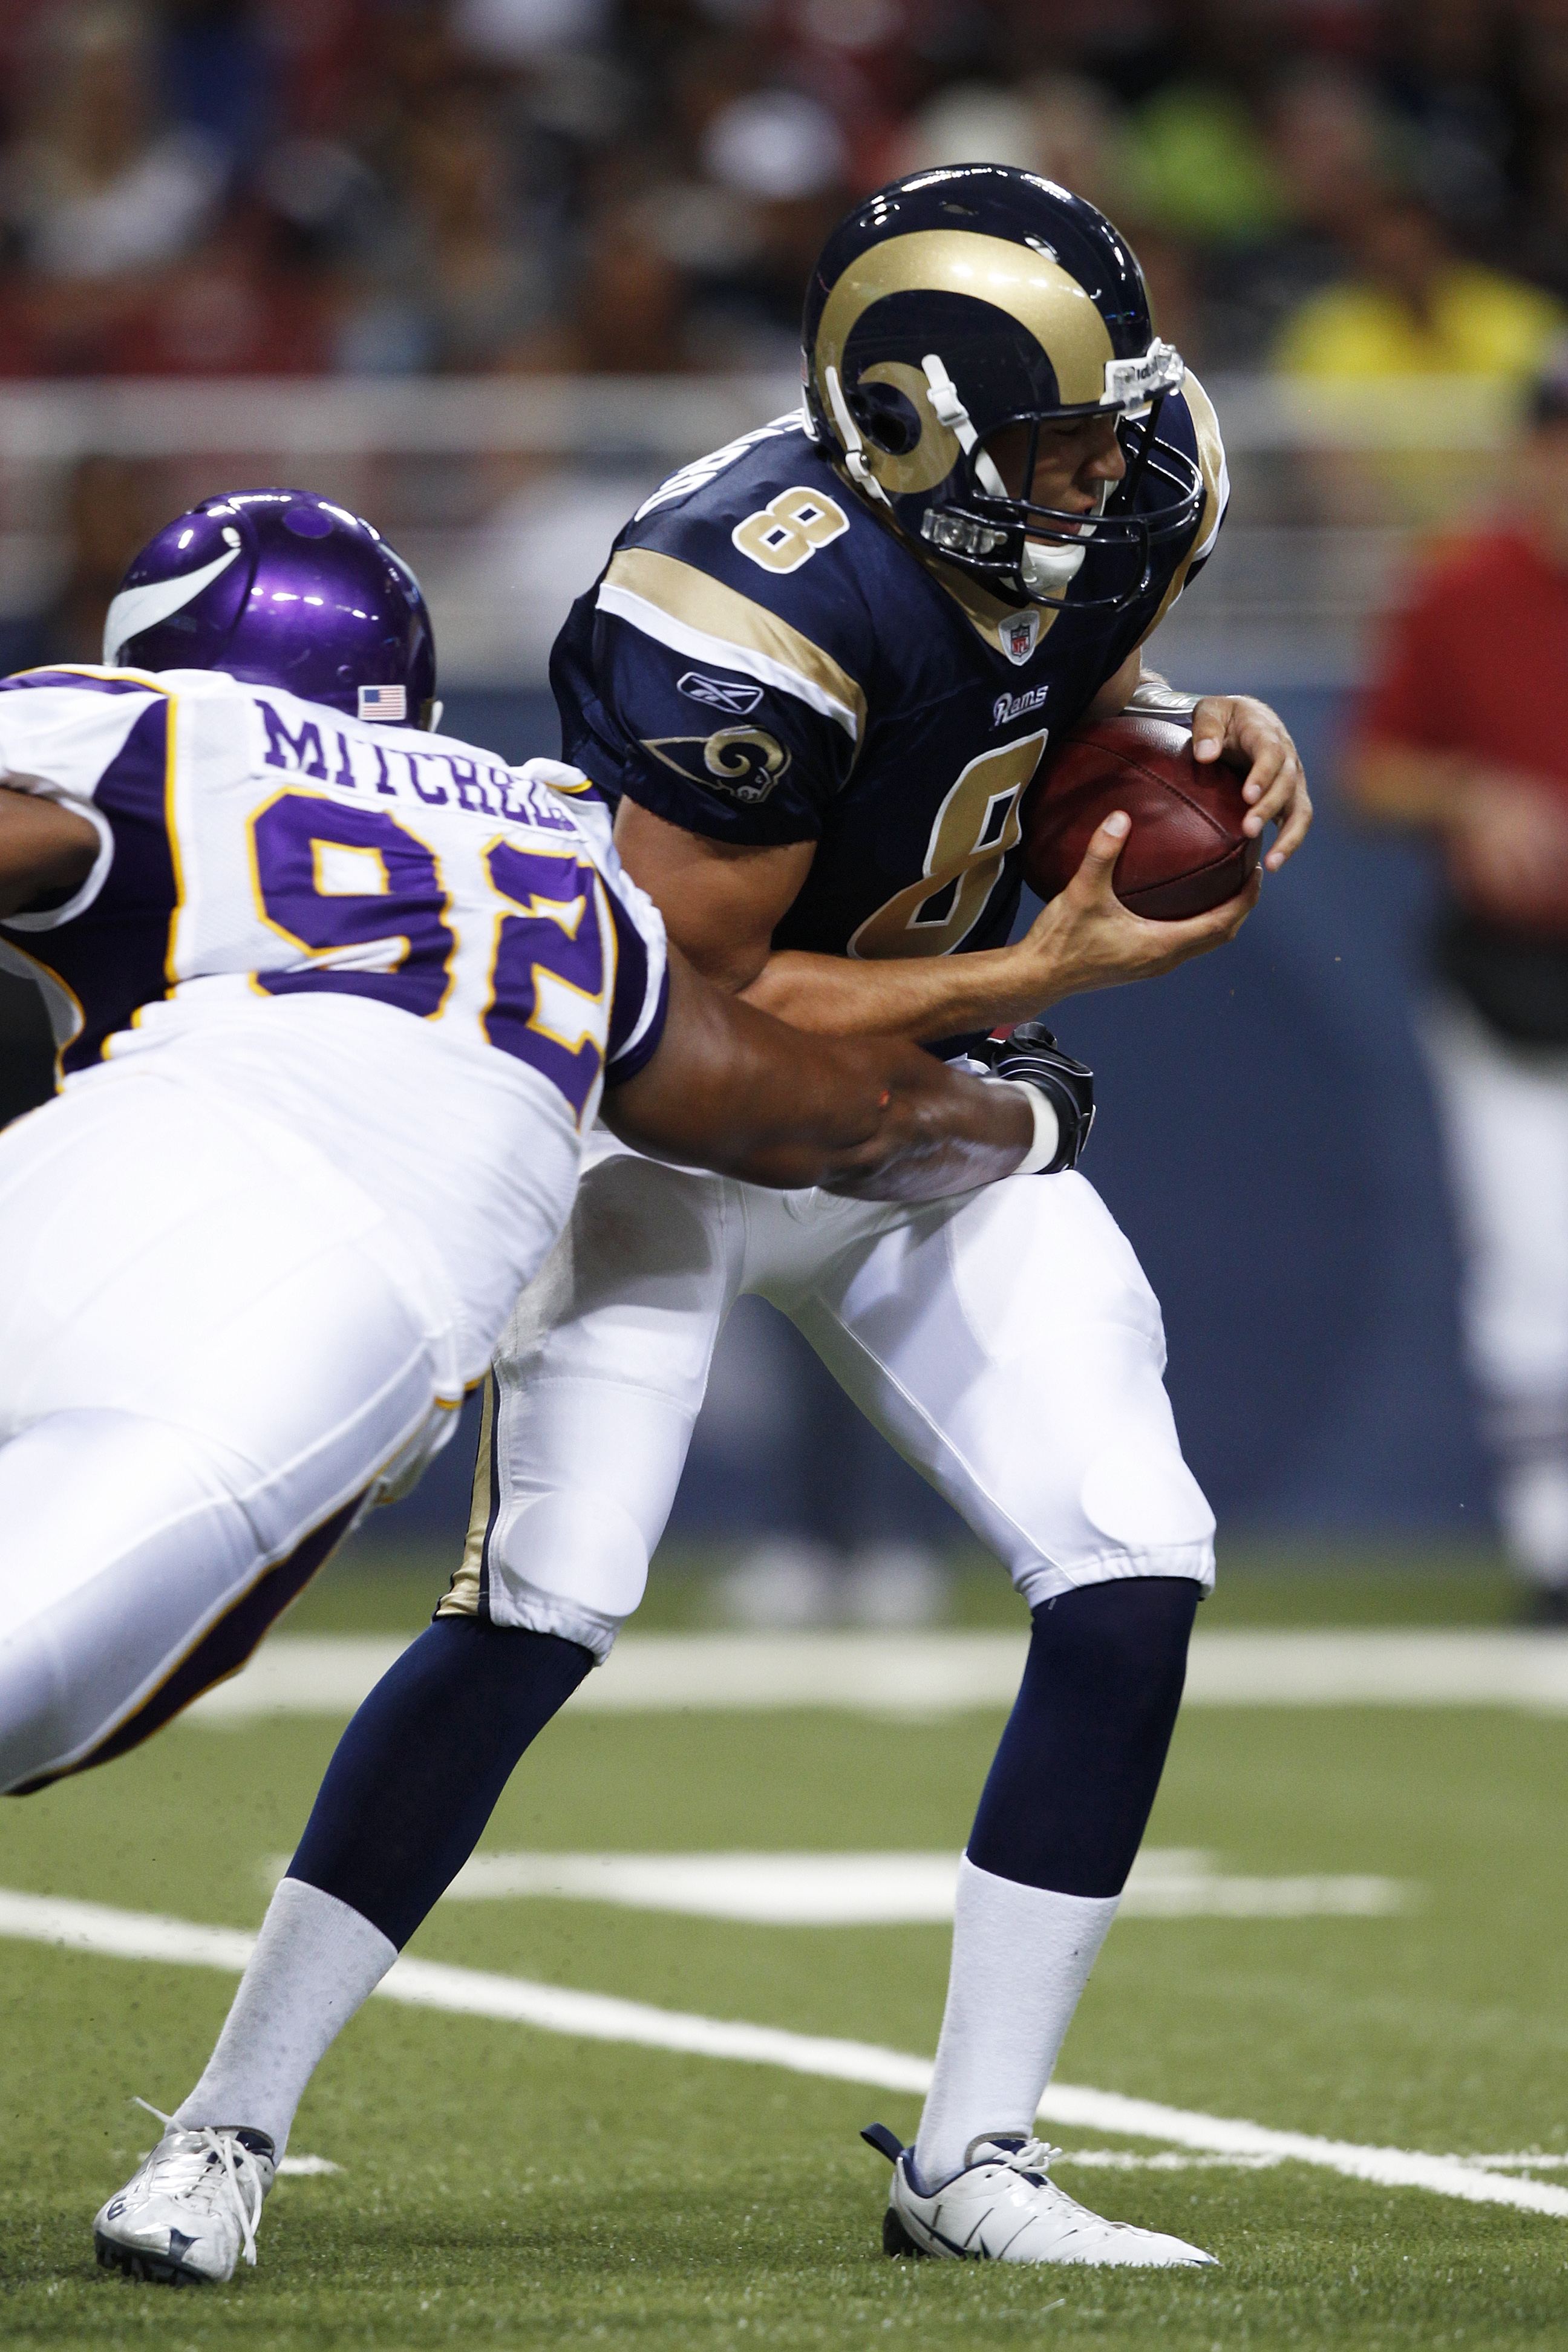 ST. LOUIS, MO - AUGUST 14: Sam Bradford #8 of the St. Louis Rams gets sacked by Jayme Mitchell #92 of the Minnesota Vikings during the preseason game at Edward Jones Dome on August 14, 2010 in St. Louis, Missouri. (Photo by Joe Robbins/Getty Images)